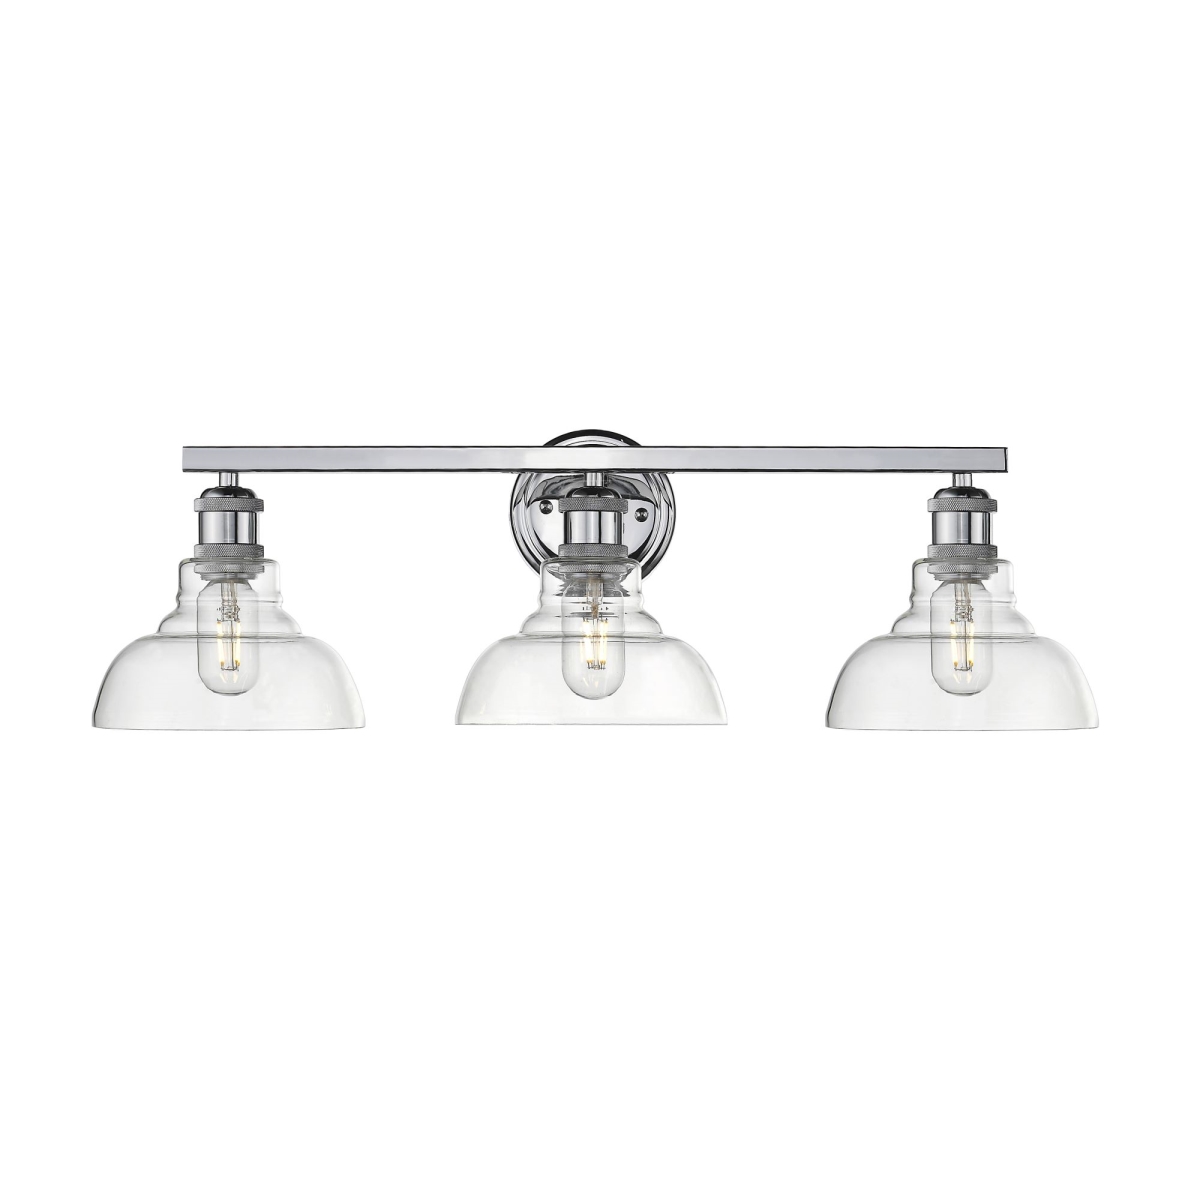 0305-ba3 Ch-clr 28 In. Carver 3 Lights Chrome Bath Fixture Wall Light With Clear Glass Shades, Silver